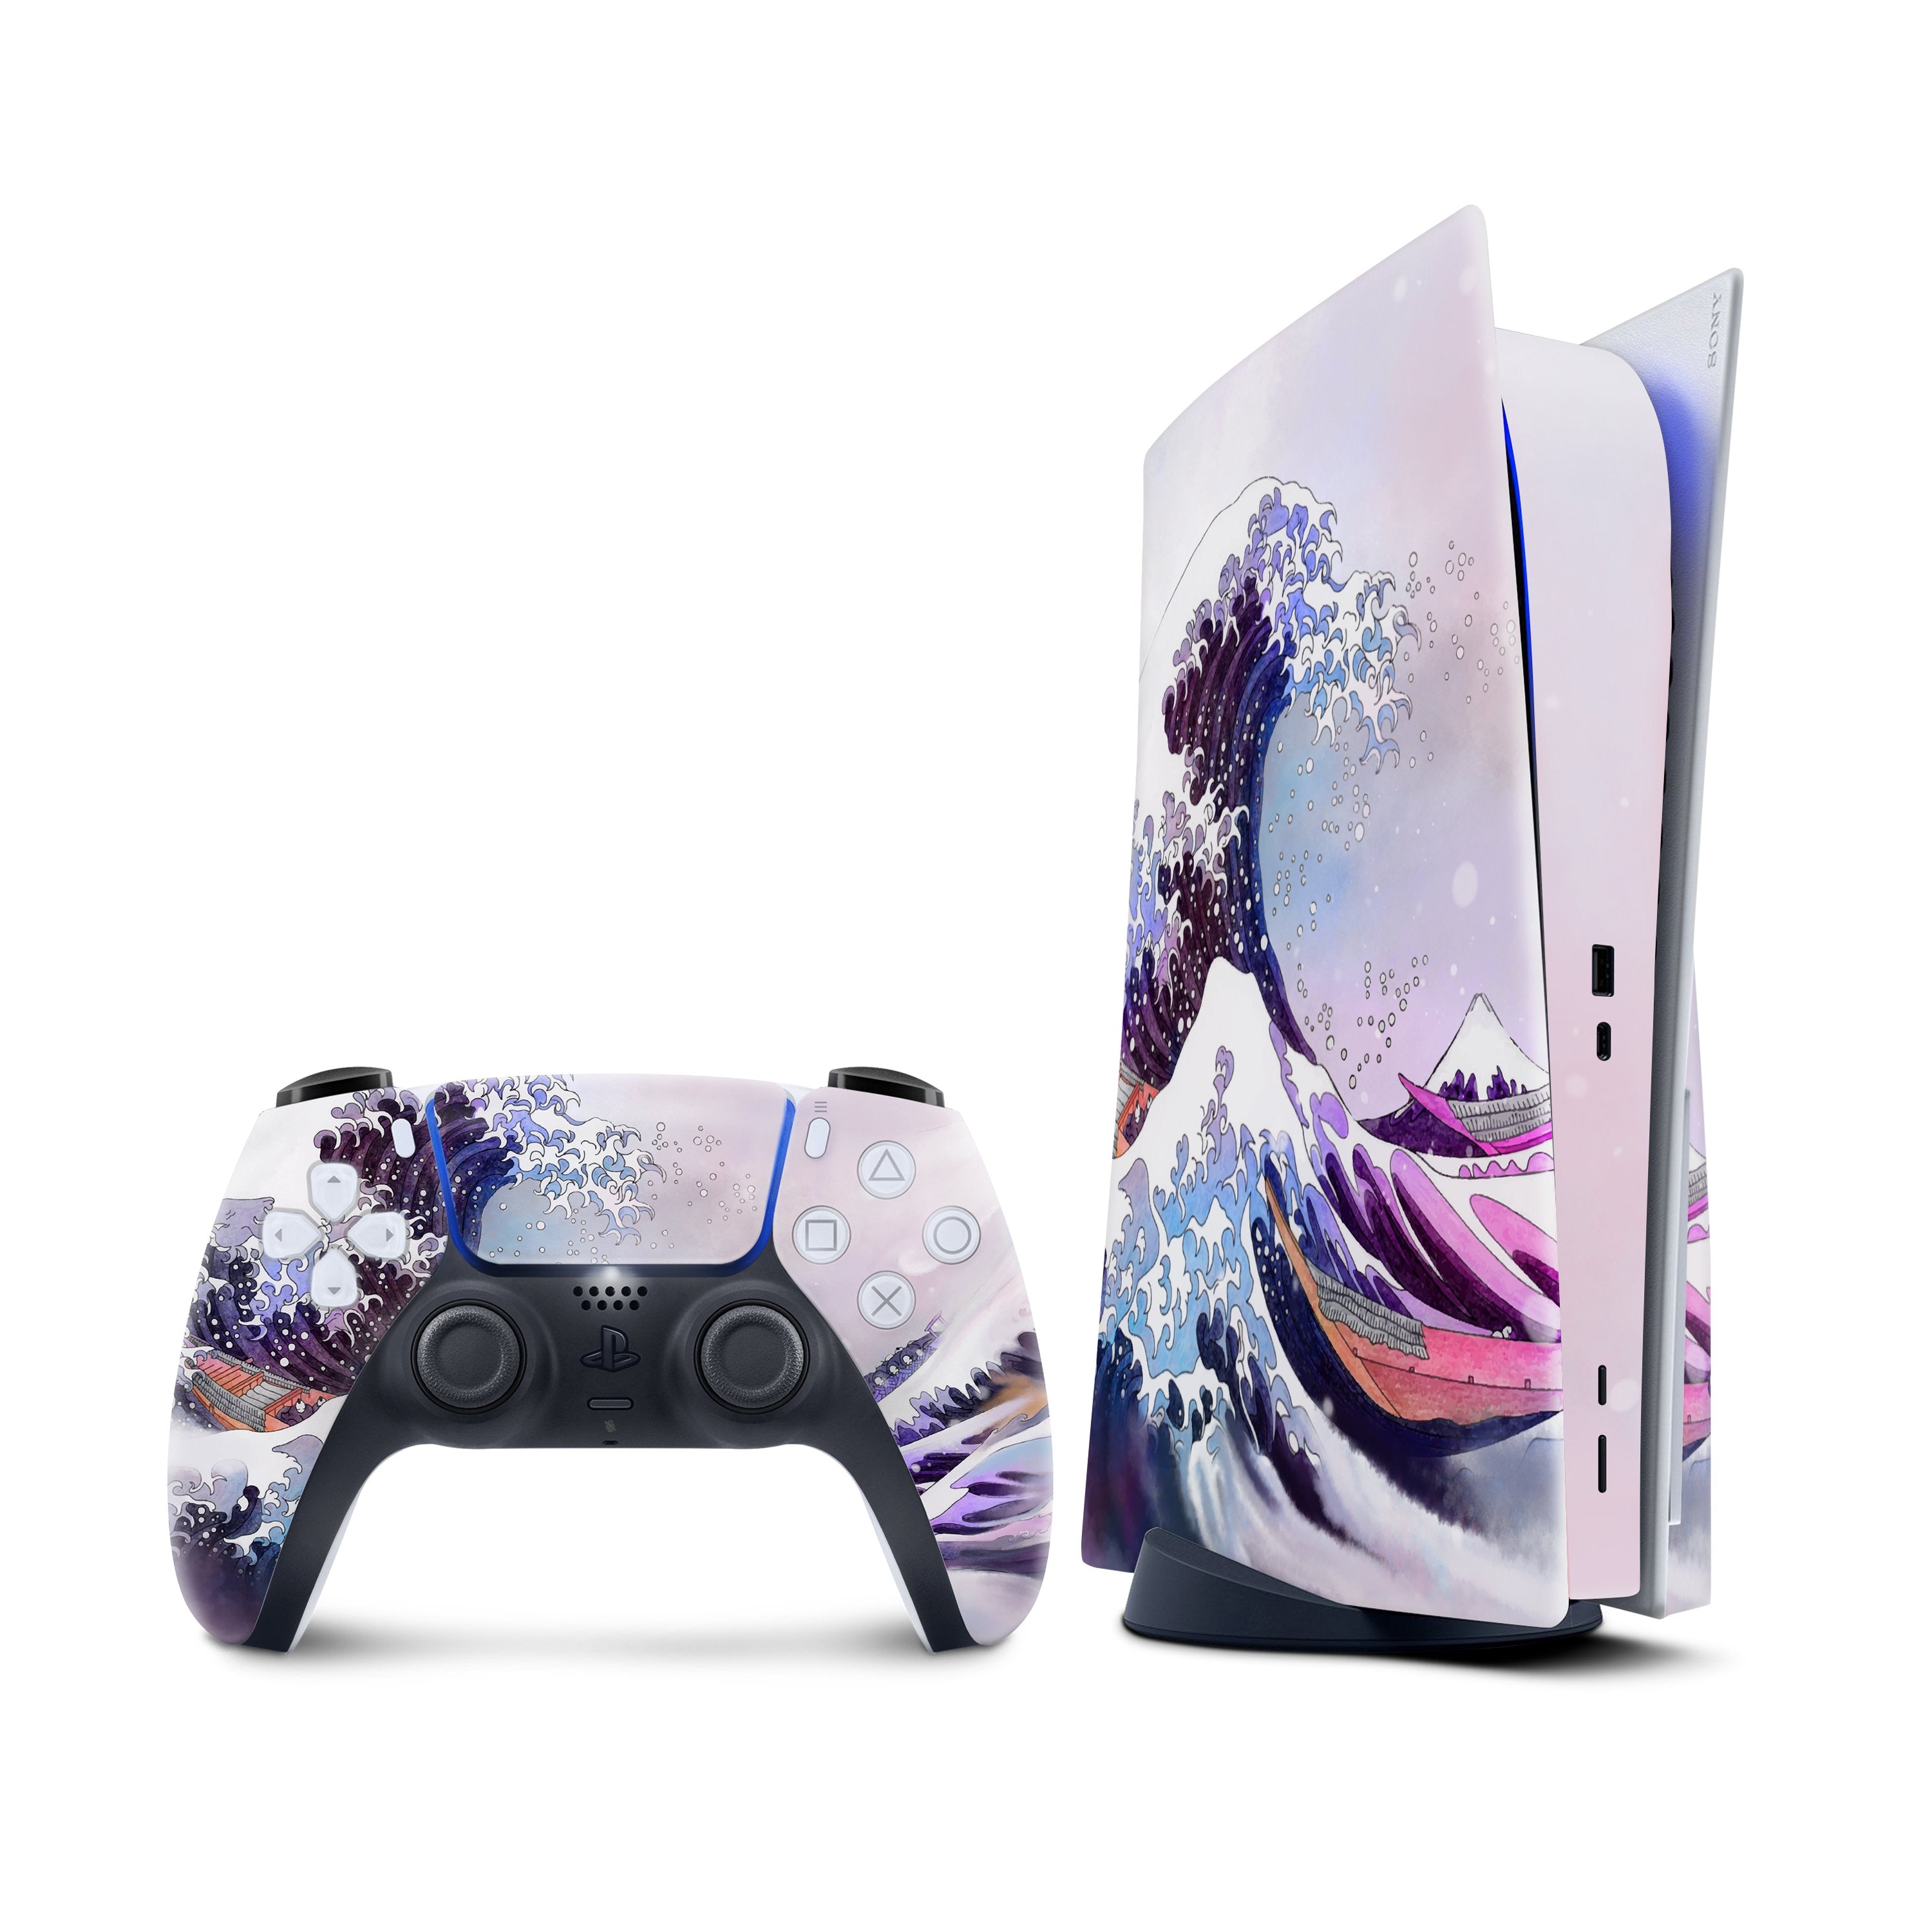 Ps5 Skin Sticker Vinyl Decal Cover For Playstation 5 Console